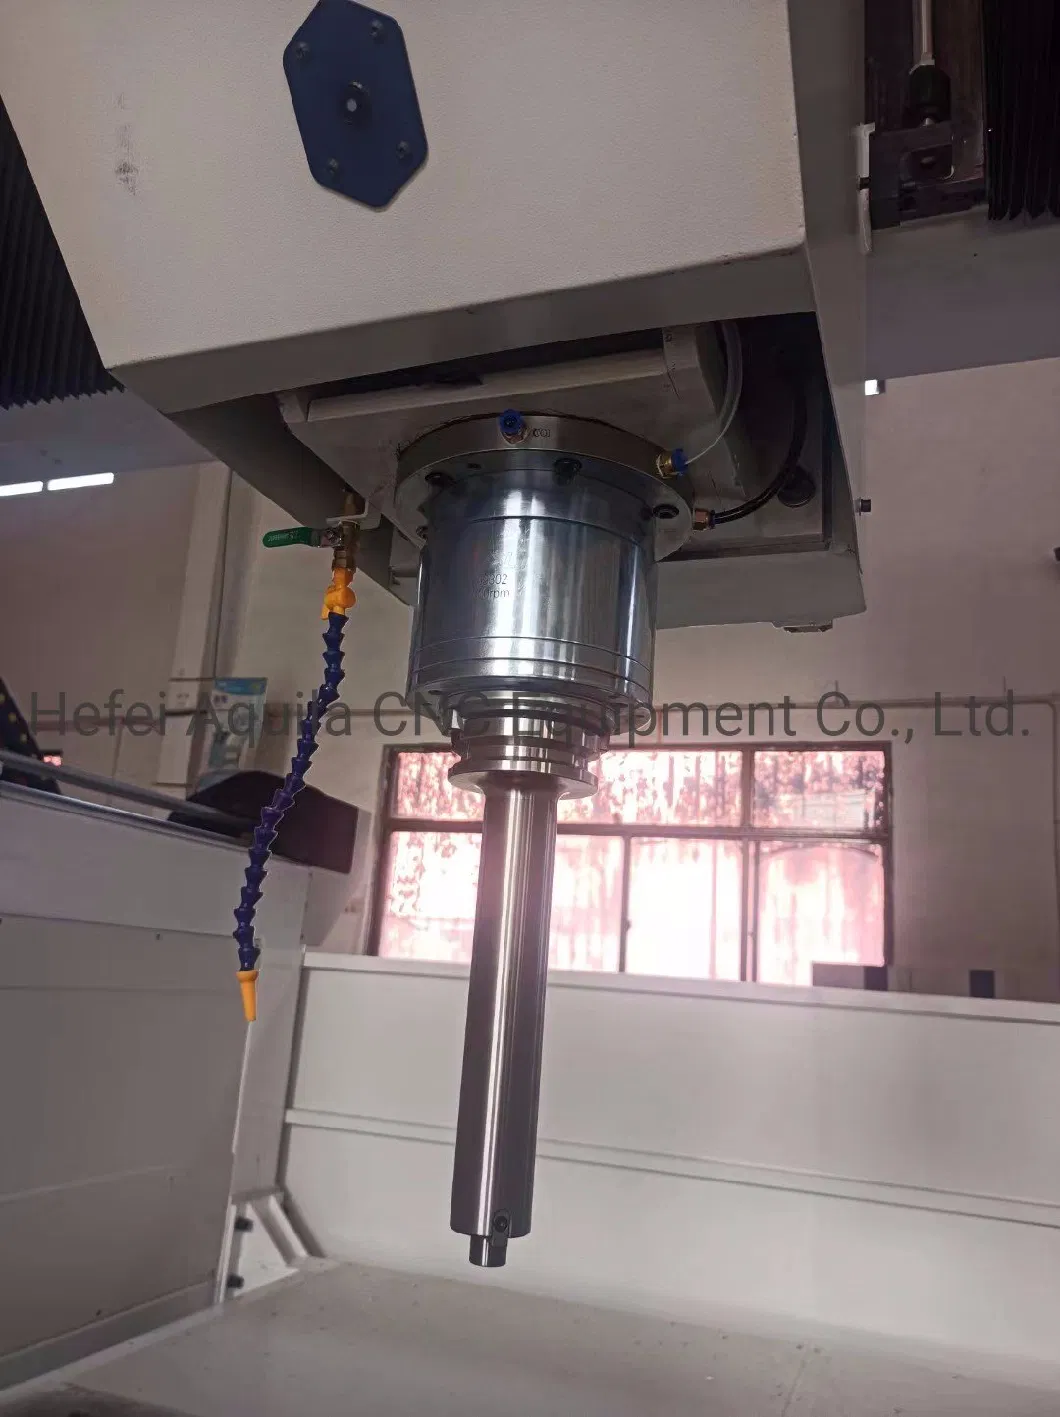 Mars CNC Router for Making Motorhome Parts Foam Mould